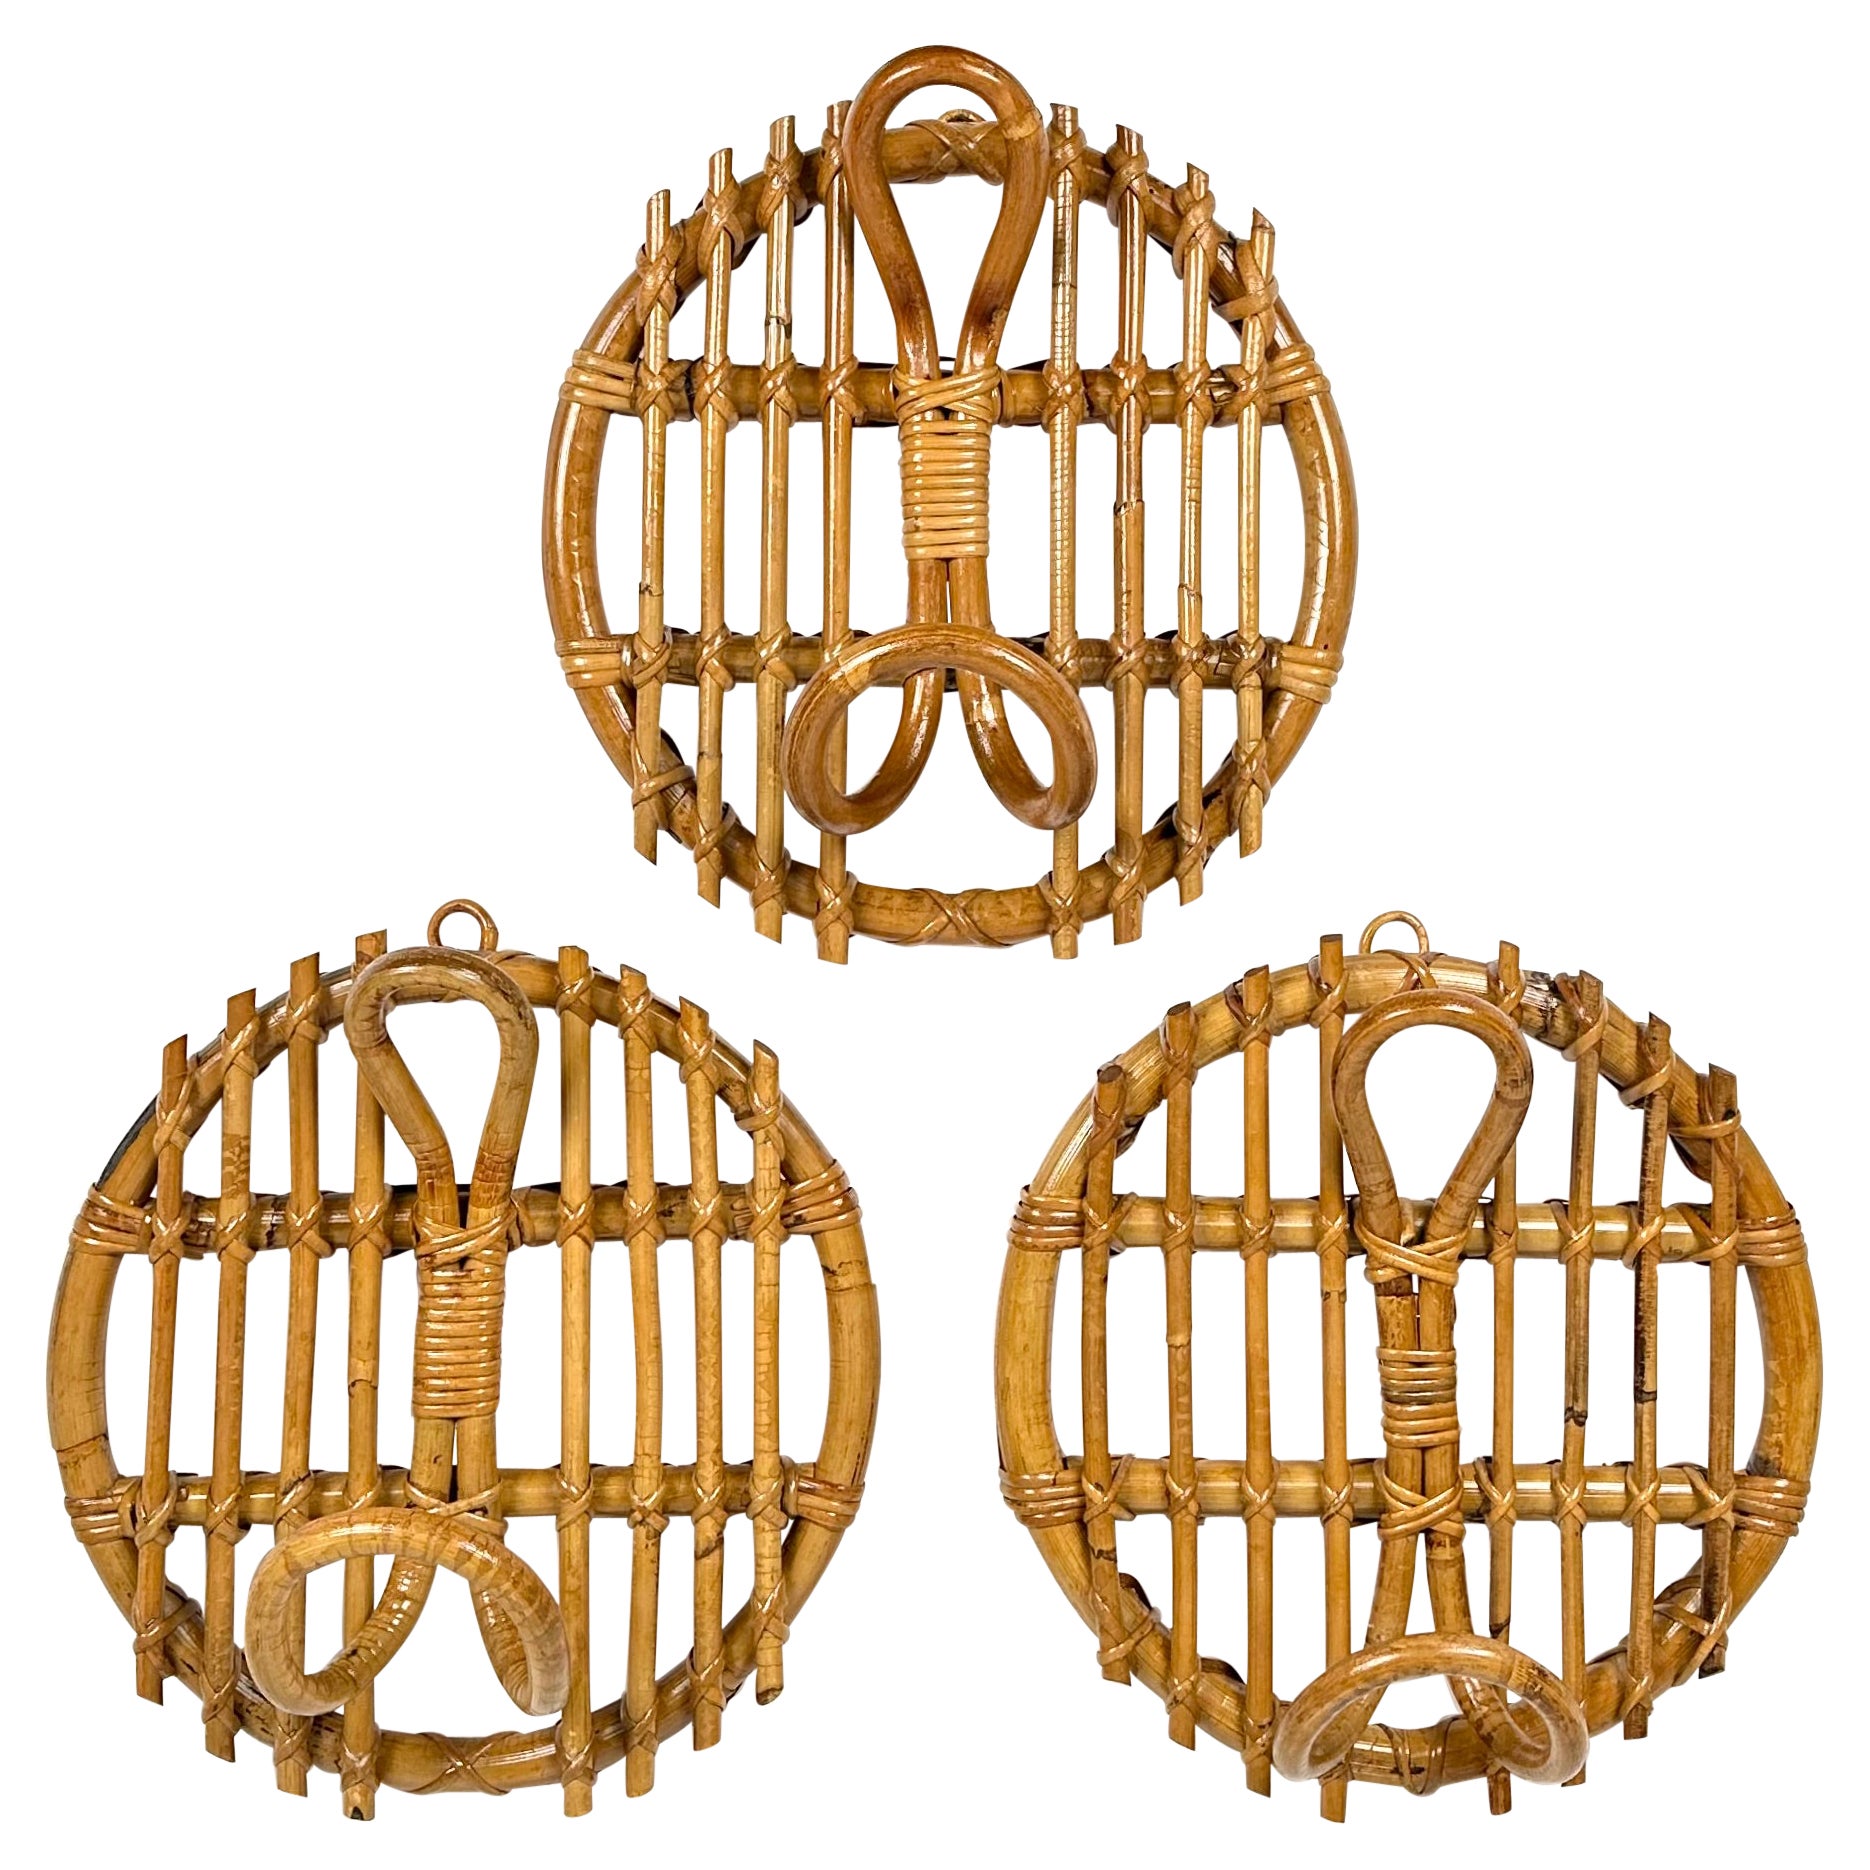 Set of 3 Coat Rack in Bamboo and Rattan Franco Albini Style, Italy, 1960s